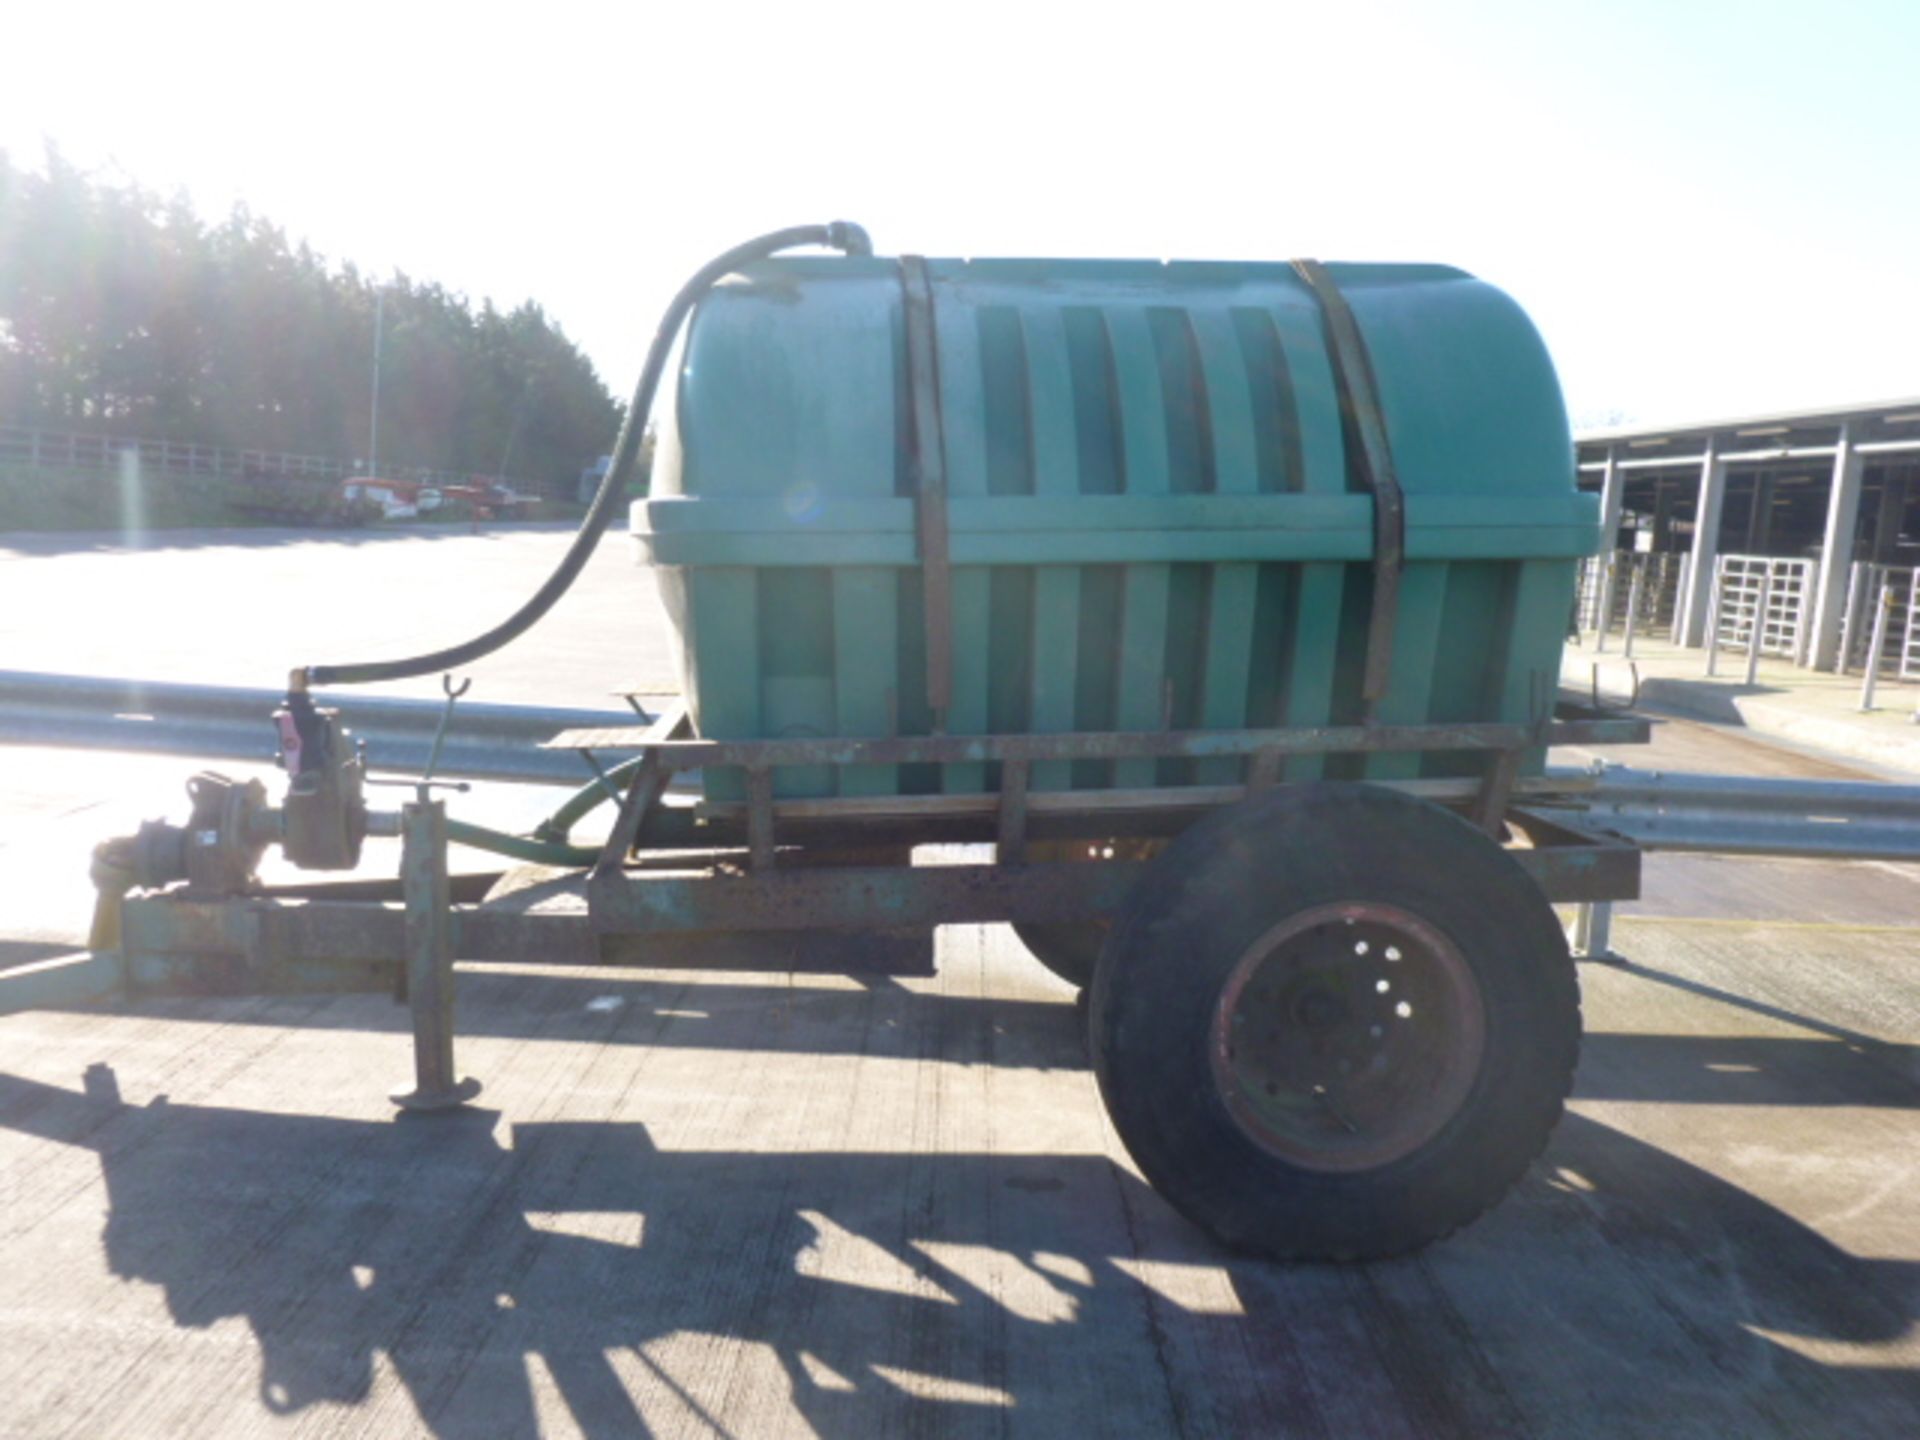 2500 L WATER BOWSER - Image 2 of 2